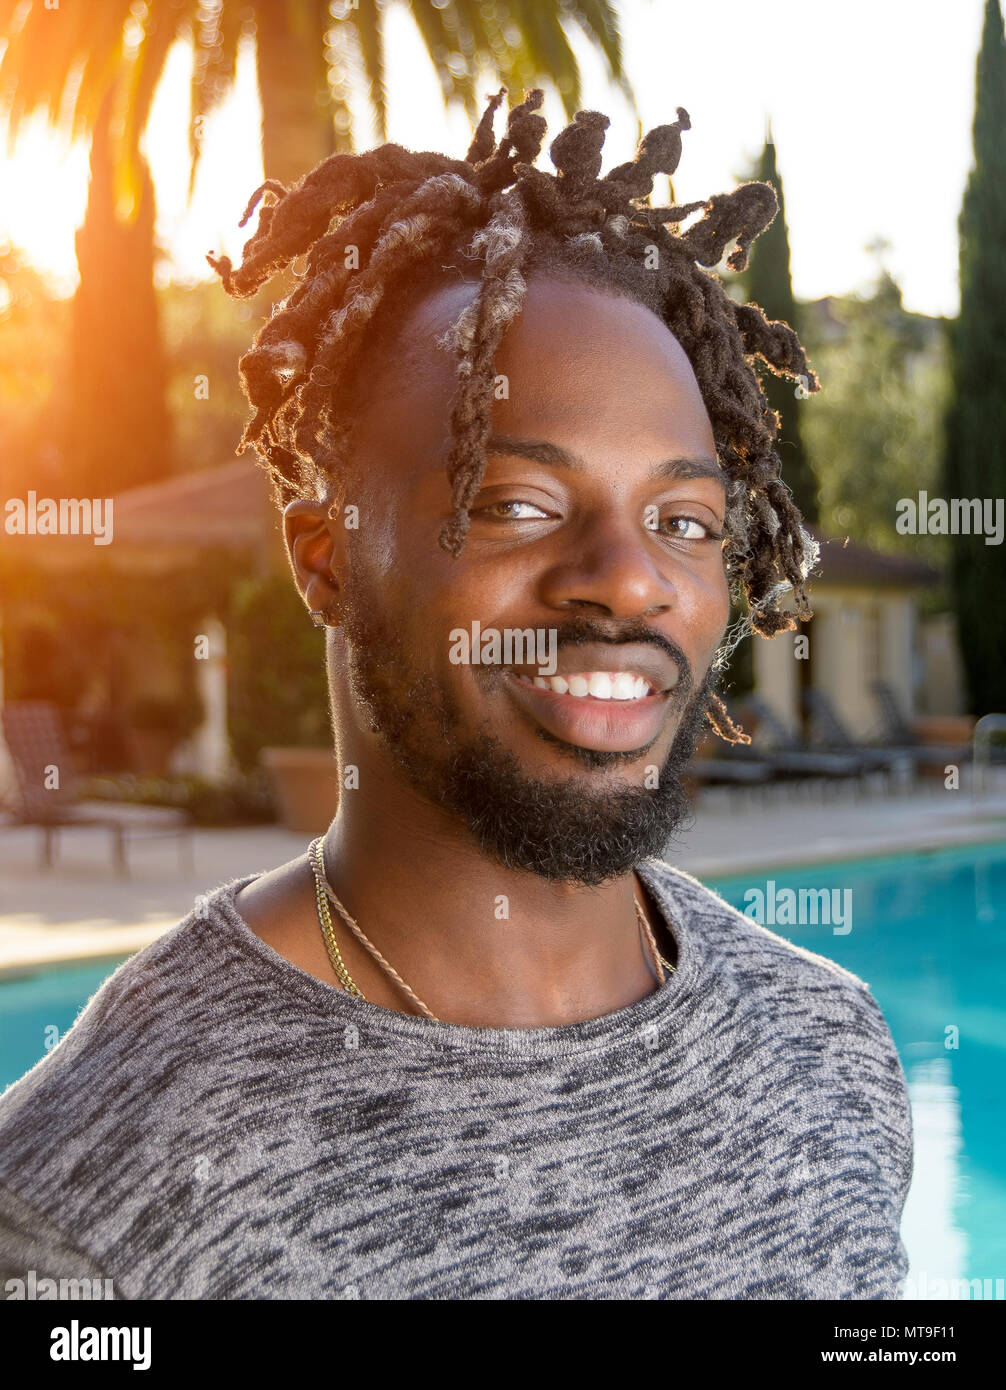 Portrait of a handsome young African American man smiling backlit by the afternoon sun. Stock Photo